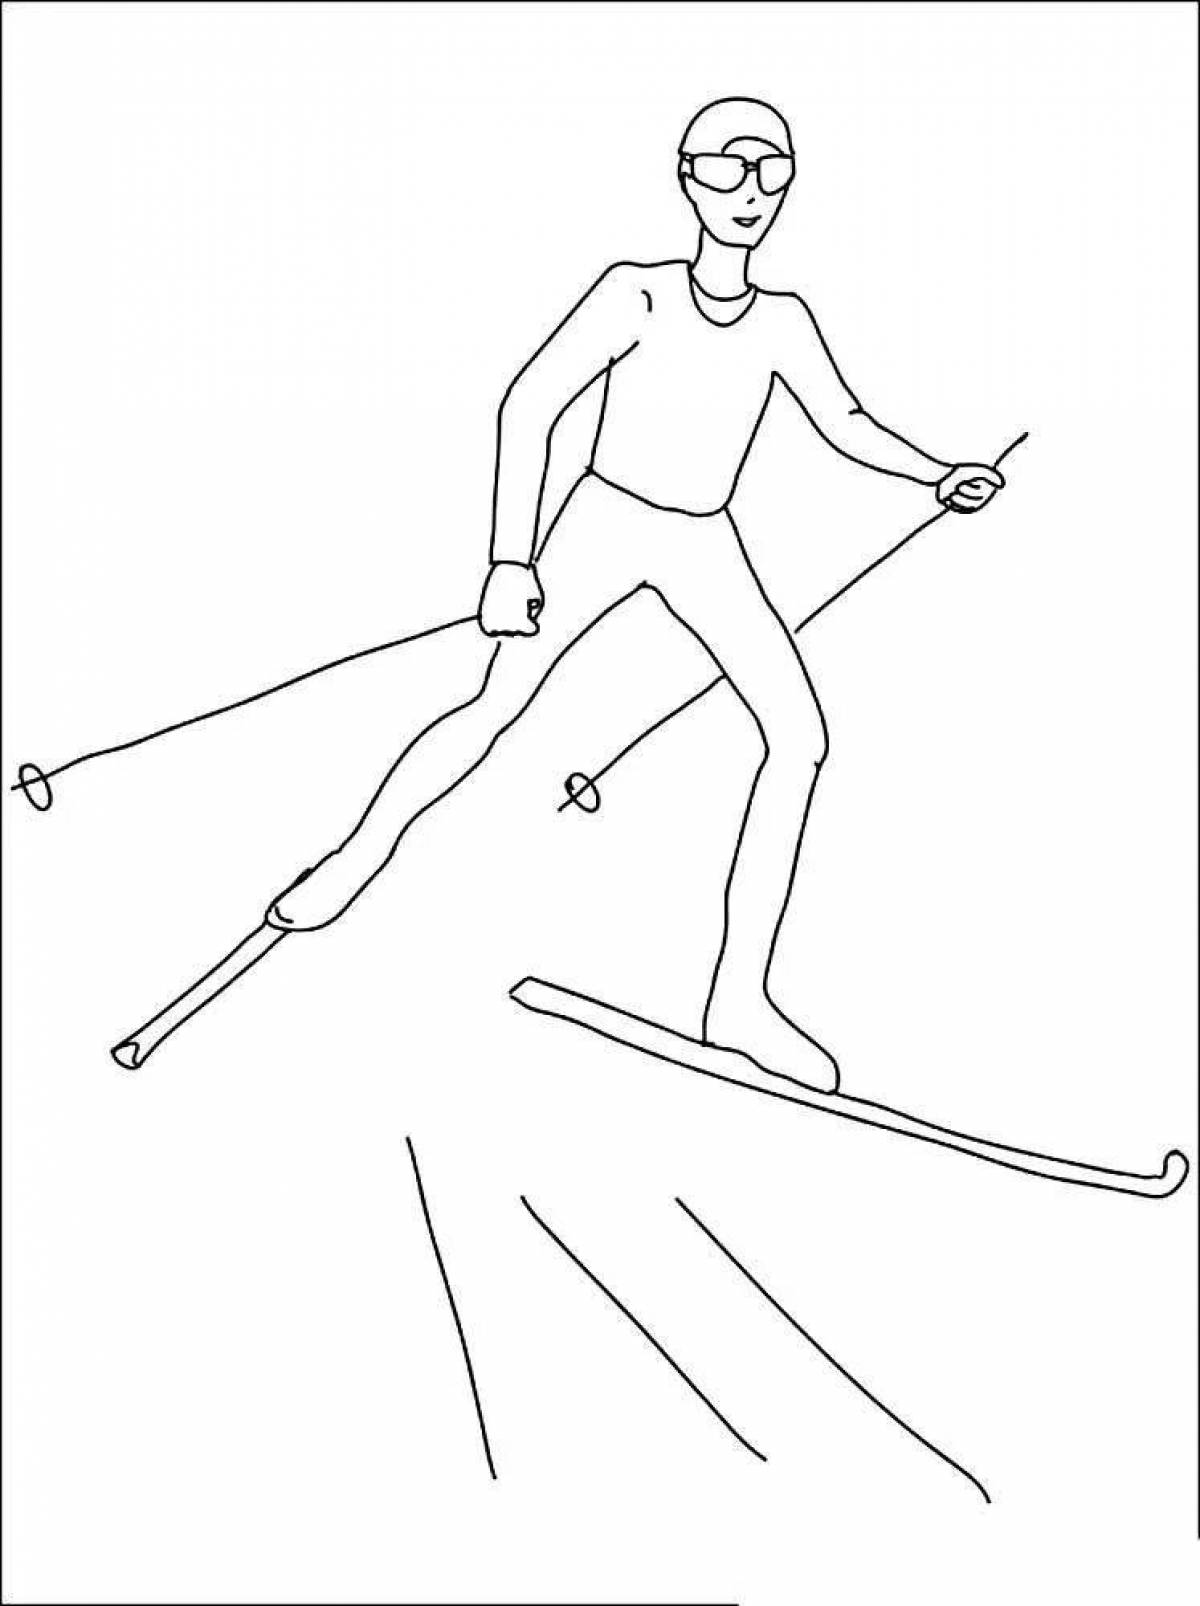 Outstanding biathlon coloring page